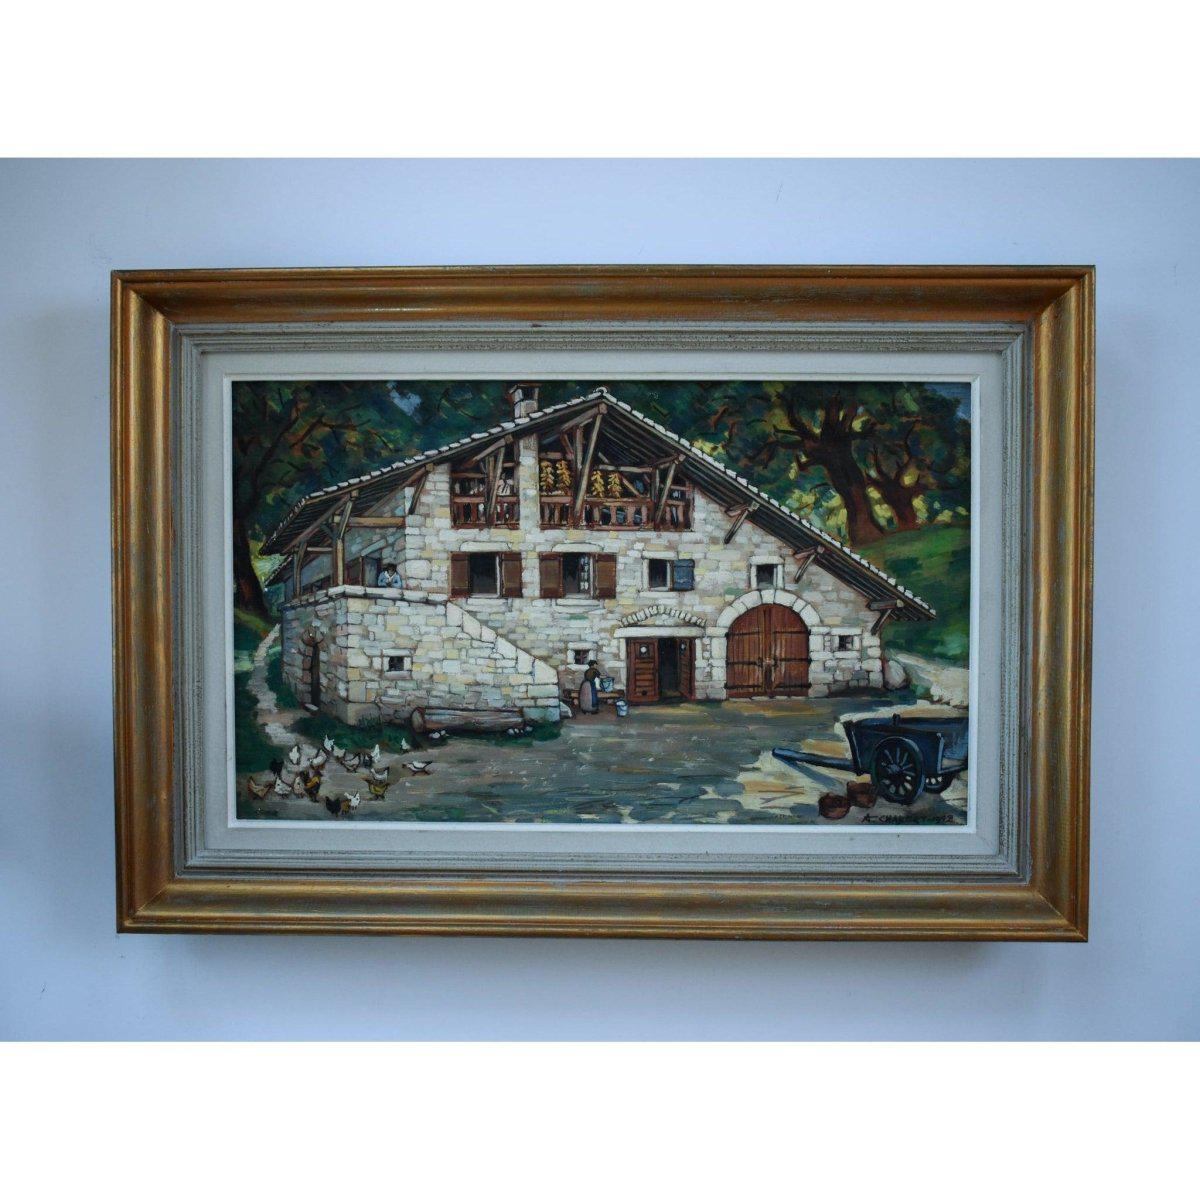 Vintage landscape oil painting french stone old farm original 1942 by André Chabert for sale at Winckelmann Gallery